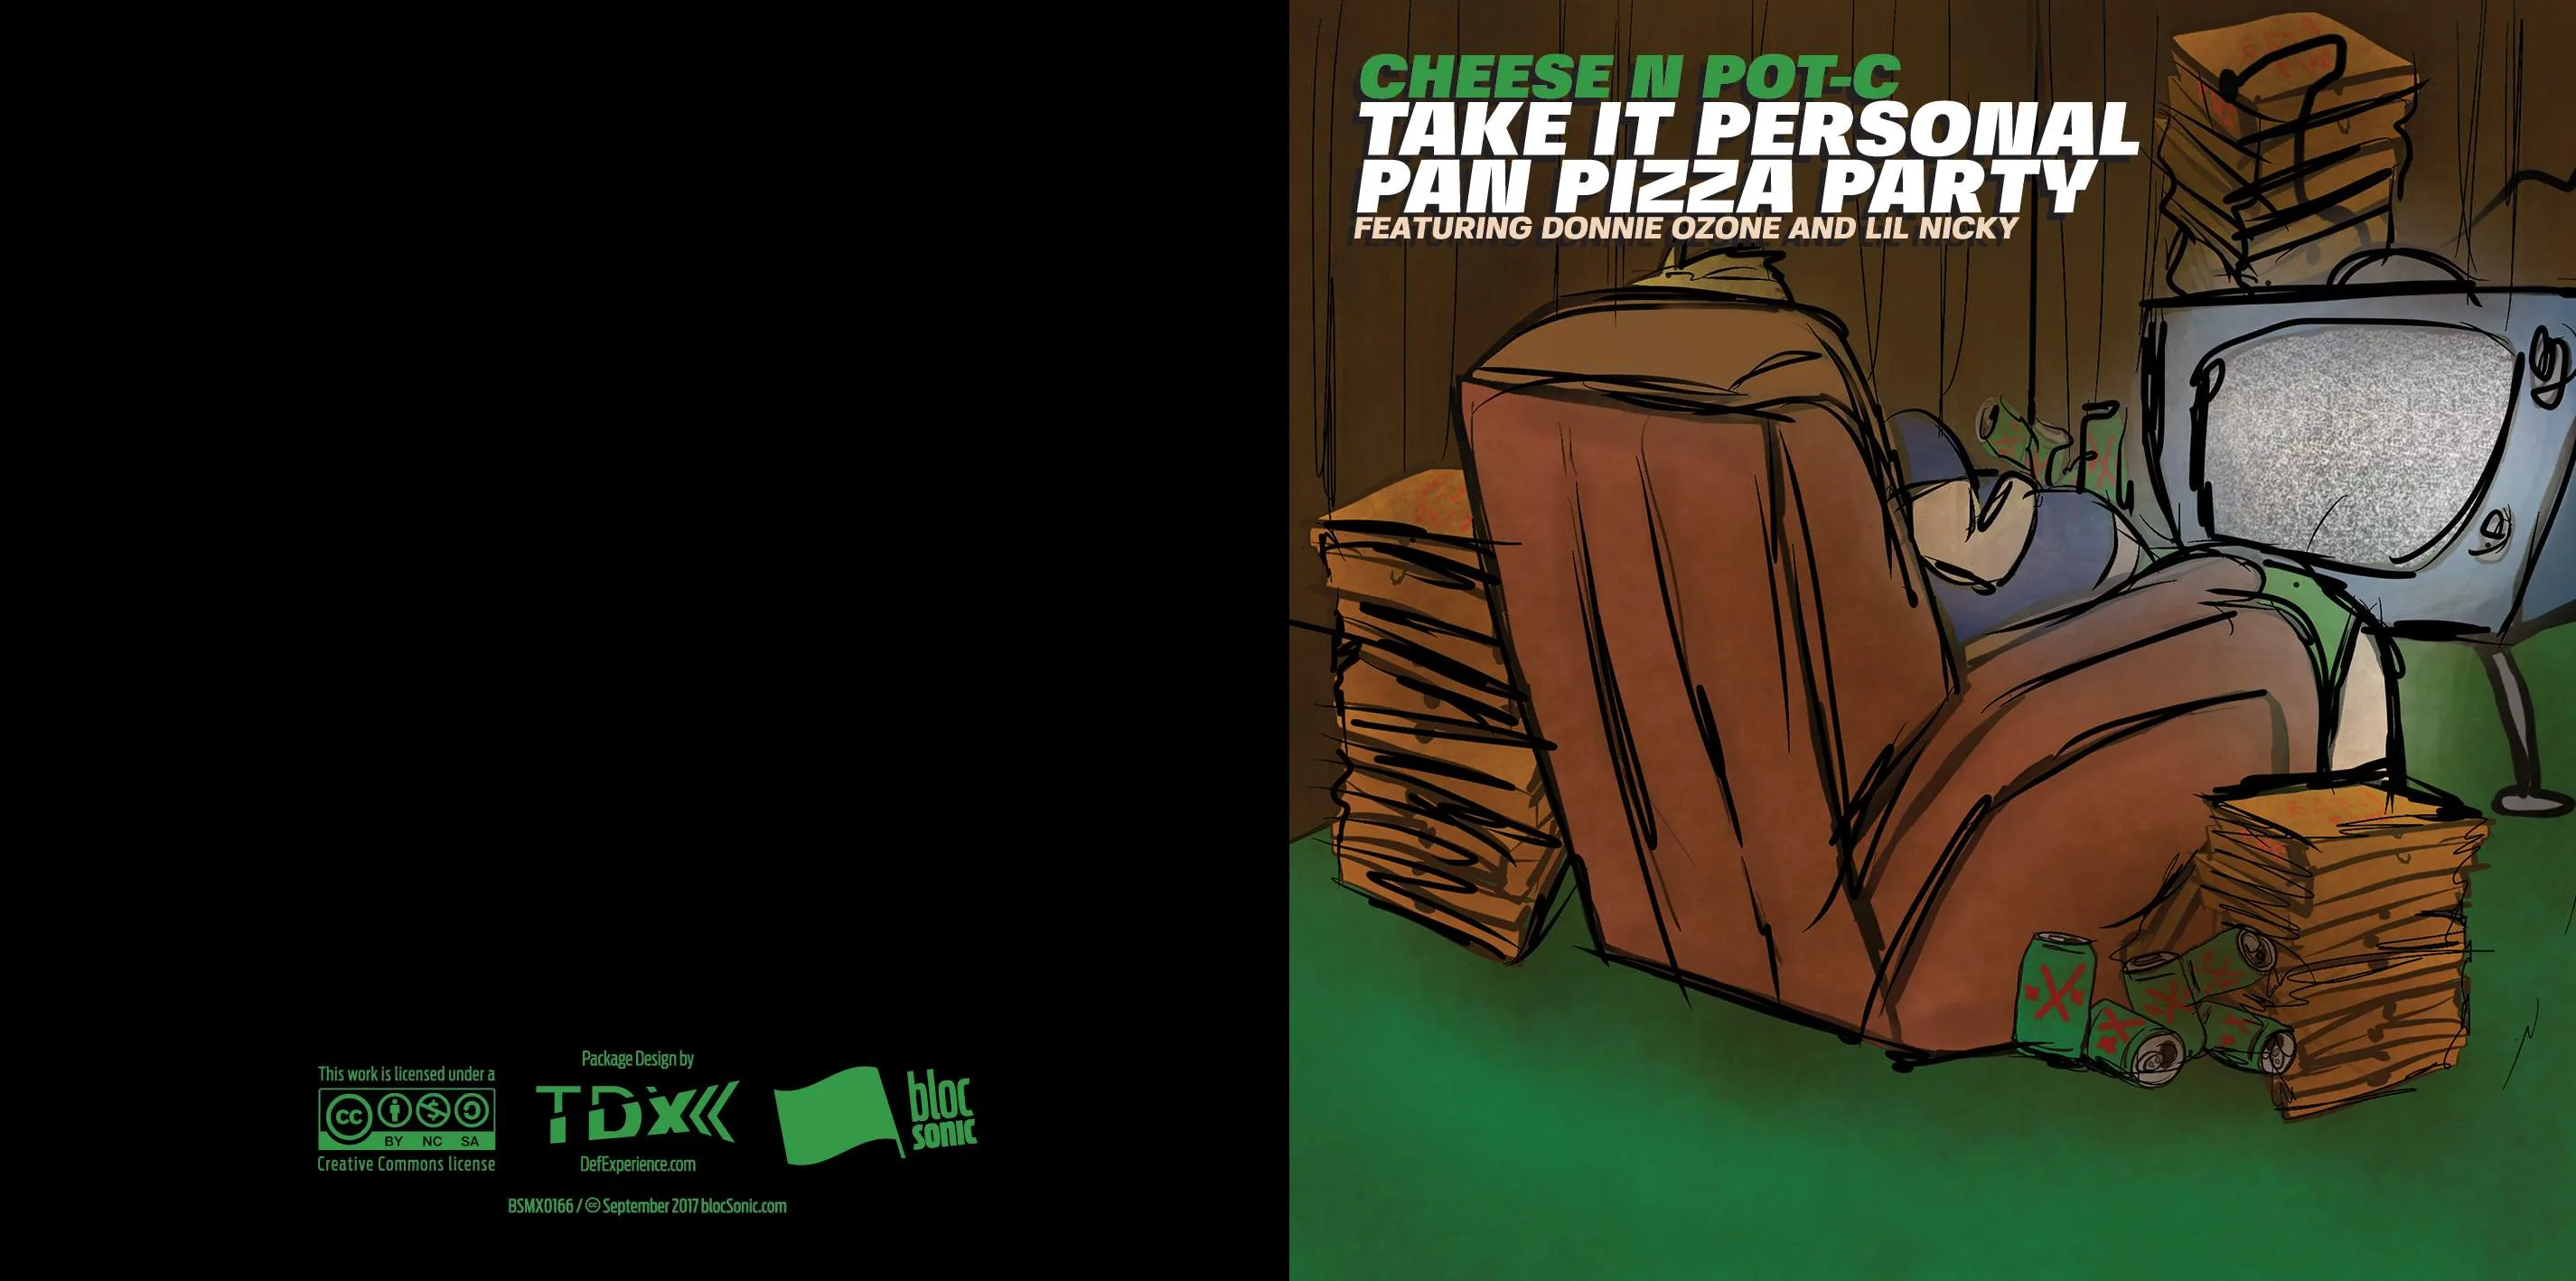 Album insert for “Take It Personal Pan Pizza Party (Featuring Donnie Ozone &amp; Lil Nicky)” by Cheese N Pot-C